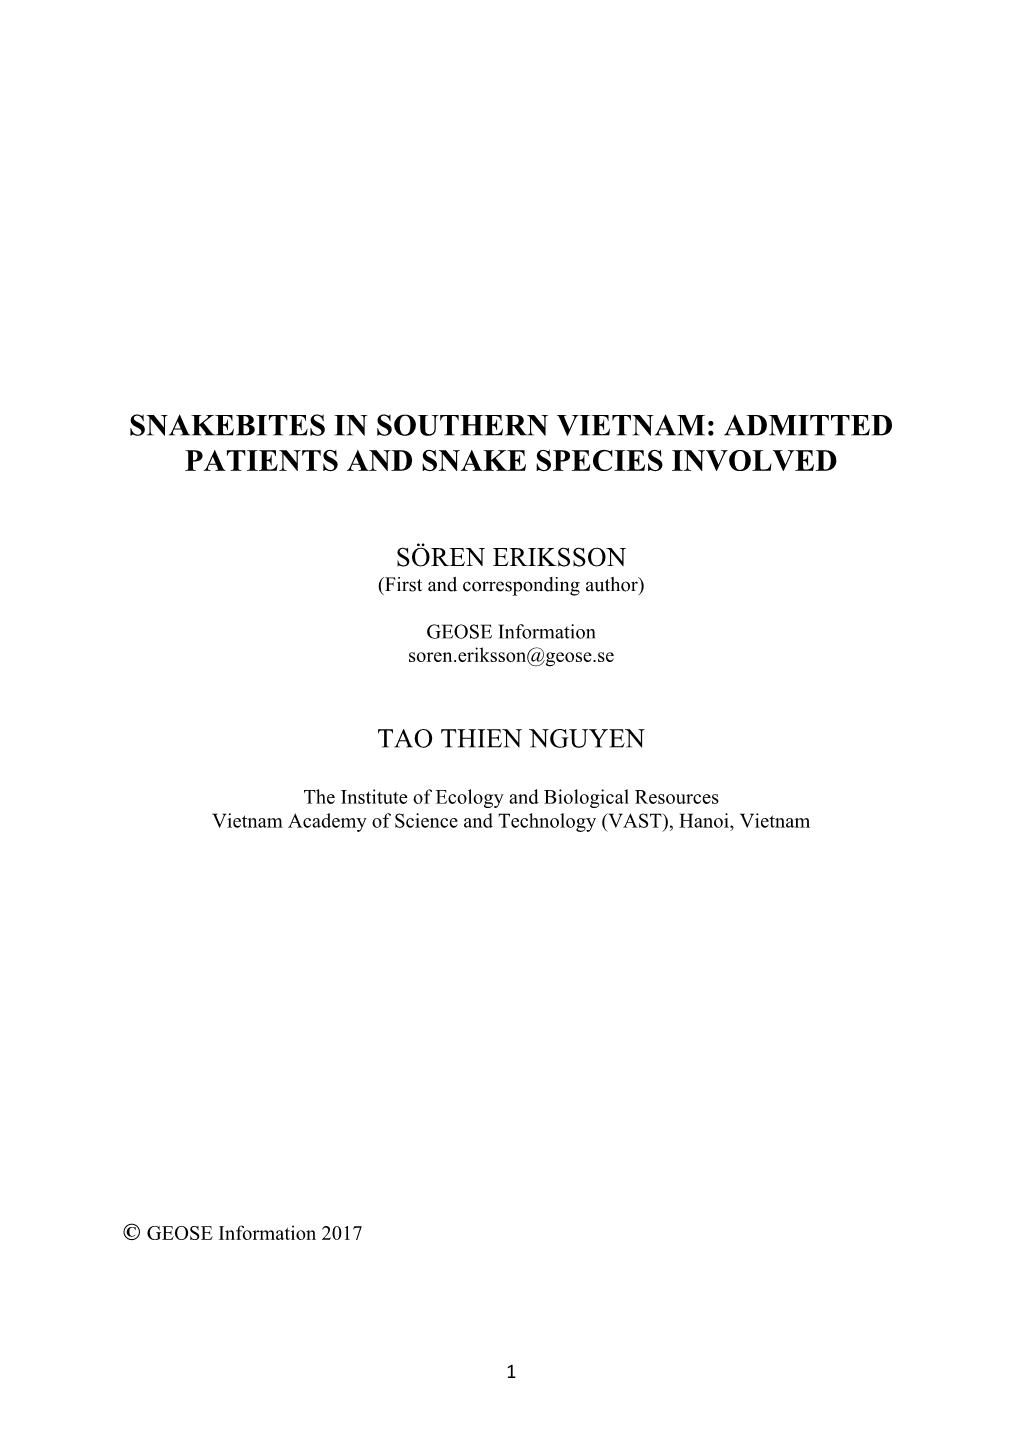 Snakebites in Southern Vietnam: Admitted Patients and Snake Species Involved